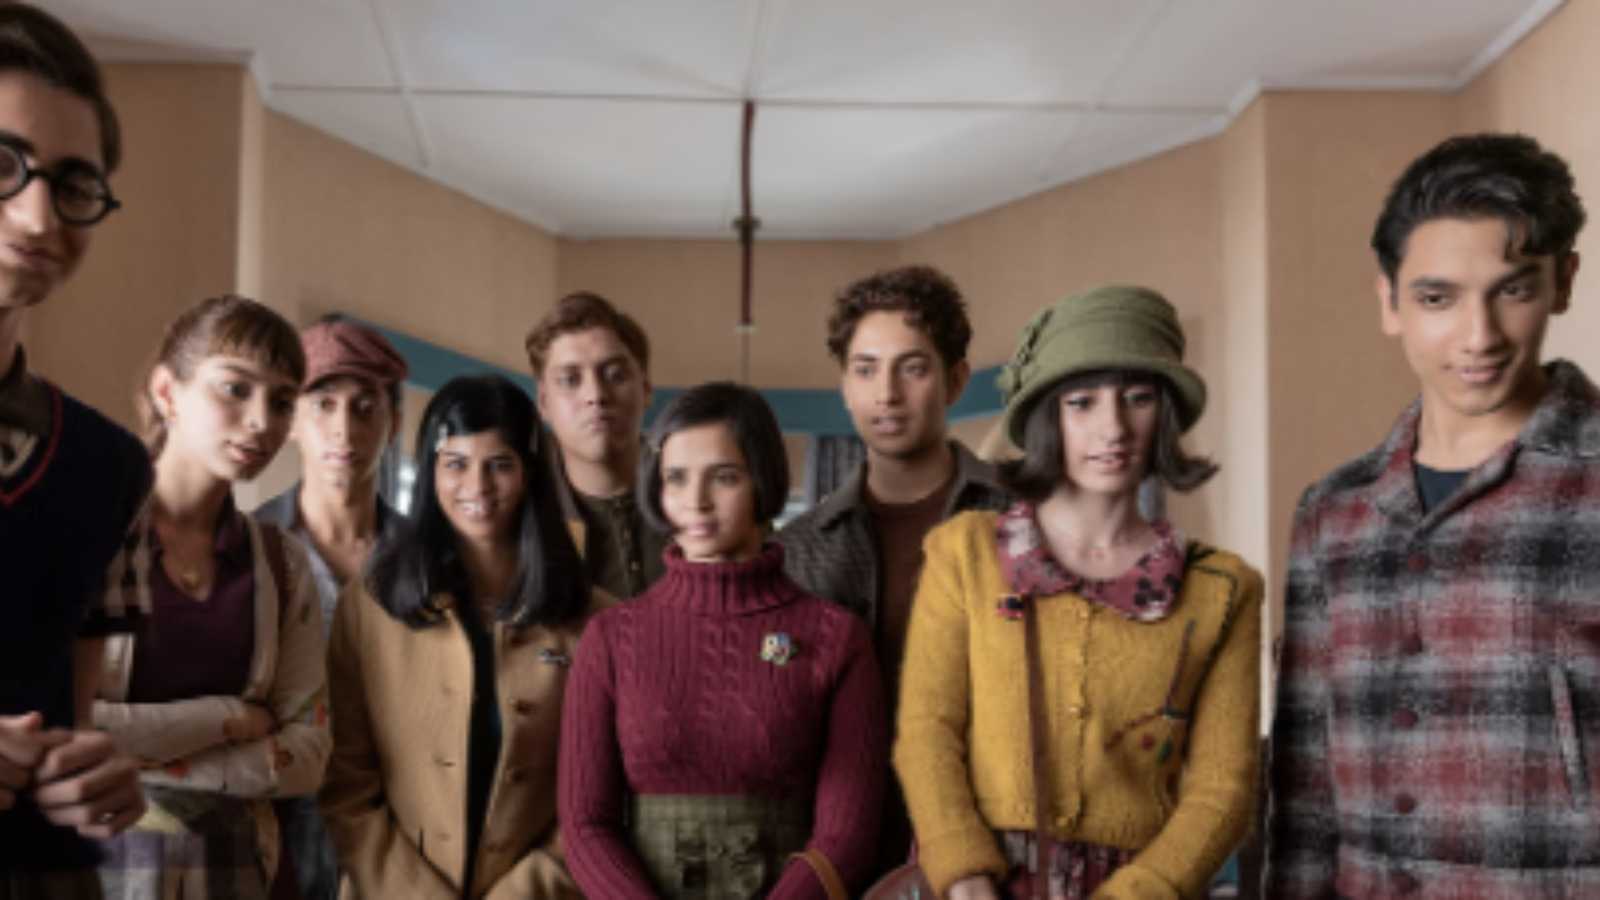 The Archies Movie Review: Agastya Nanda, Suhana Khan & Khushi Kapoor's film only rides in nostalgia and no solid impact